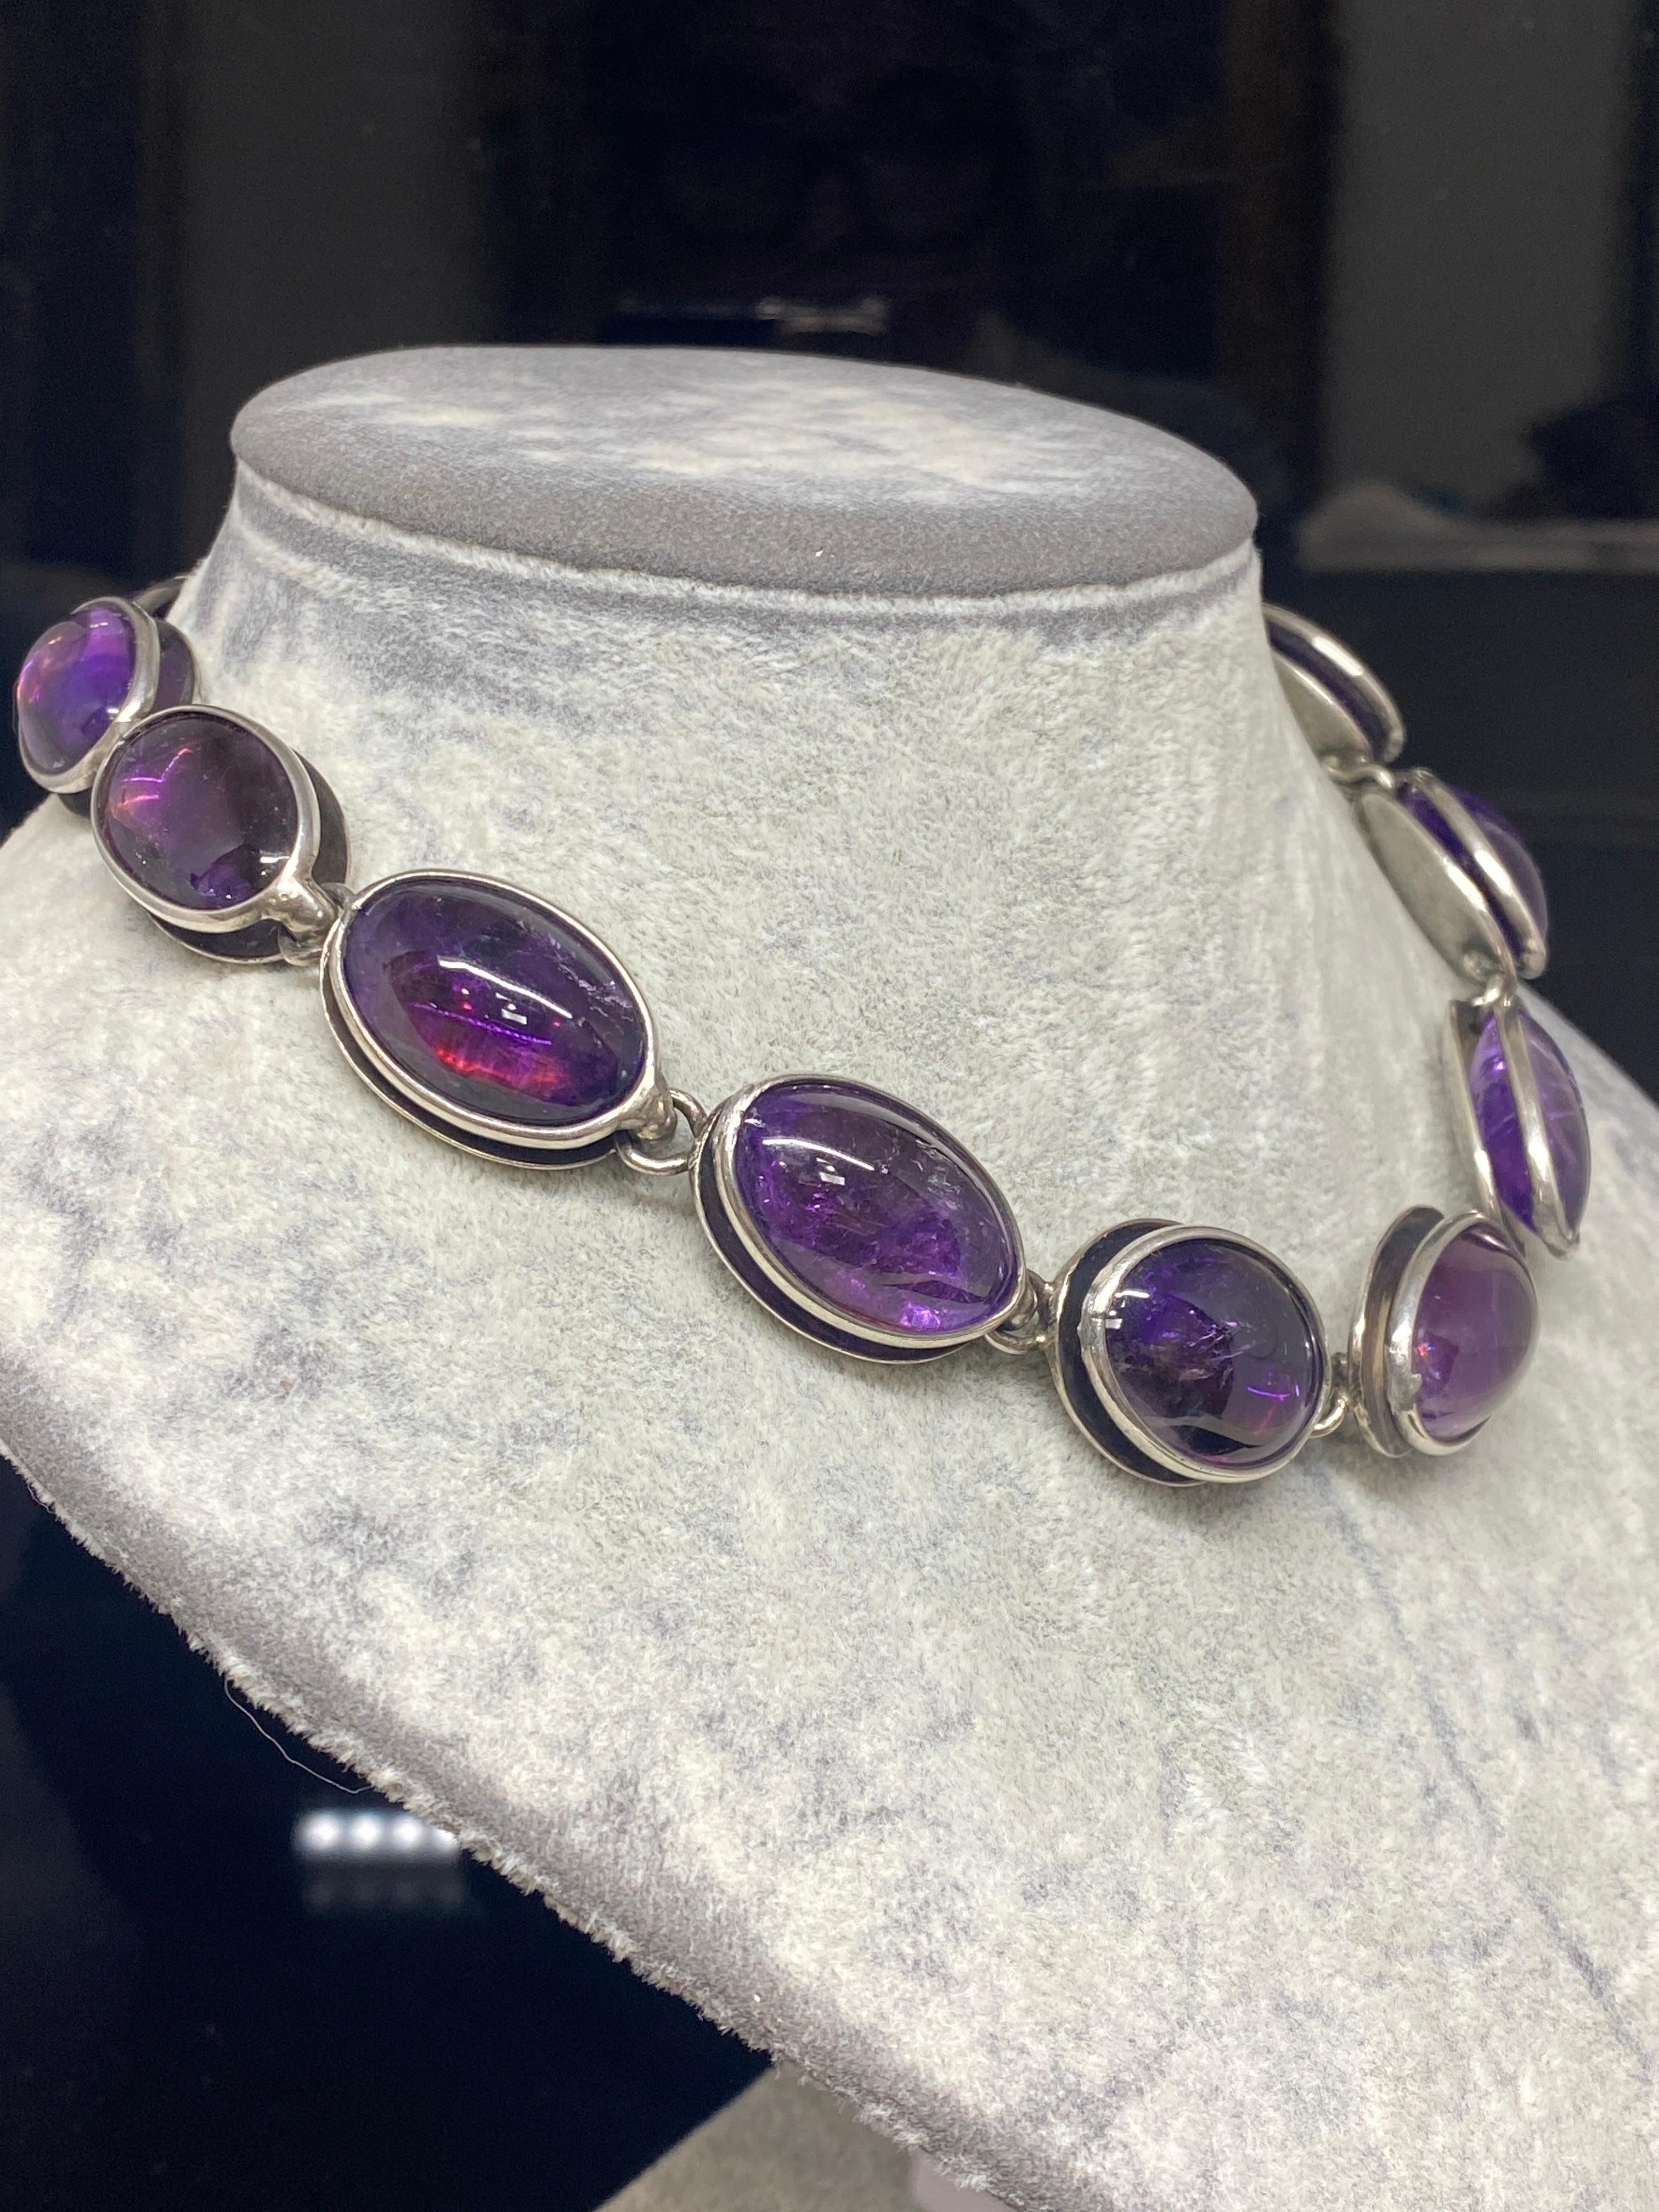 Vintage Mexico Modernist 1950’s Antonia Pineda 970 Silver & Amethyst Necklace  For Sale 3